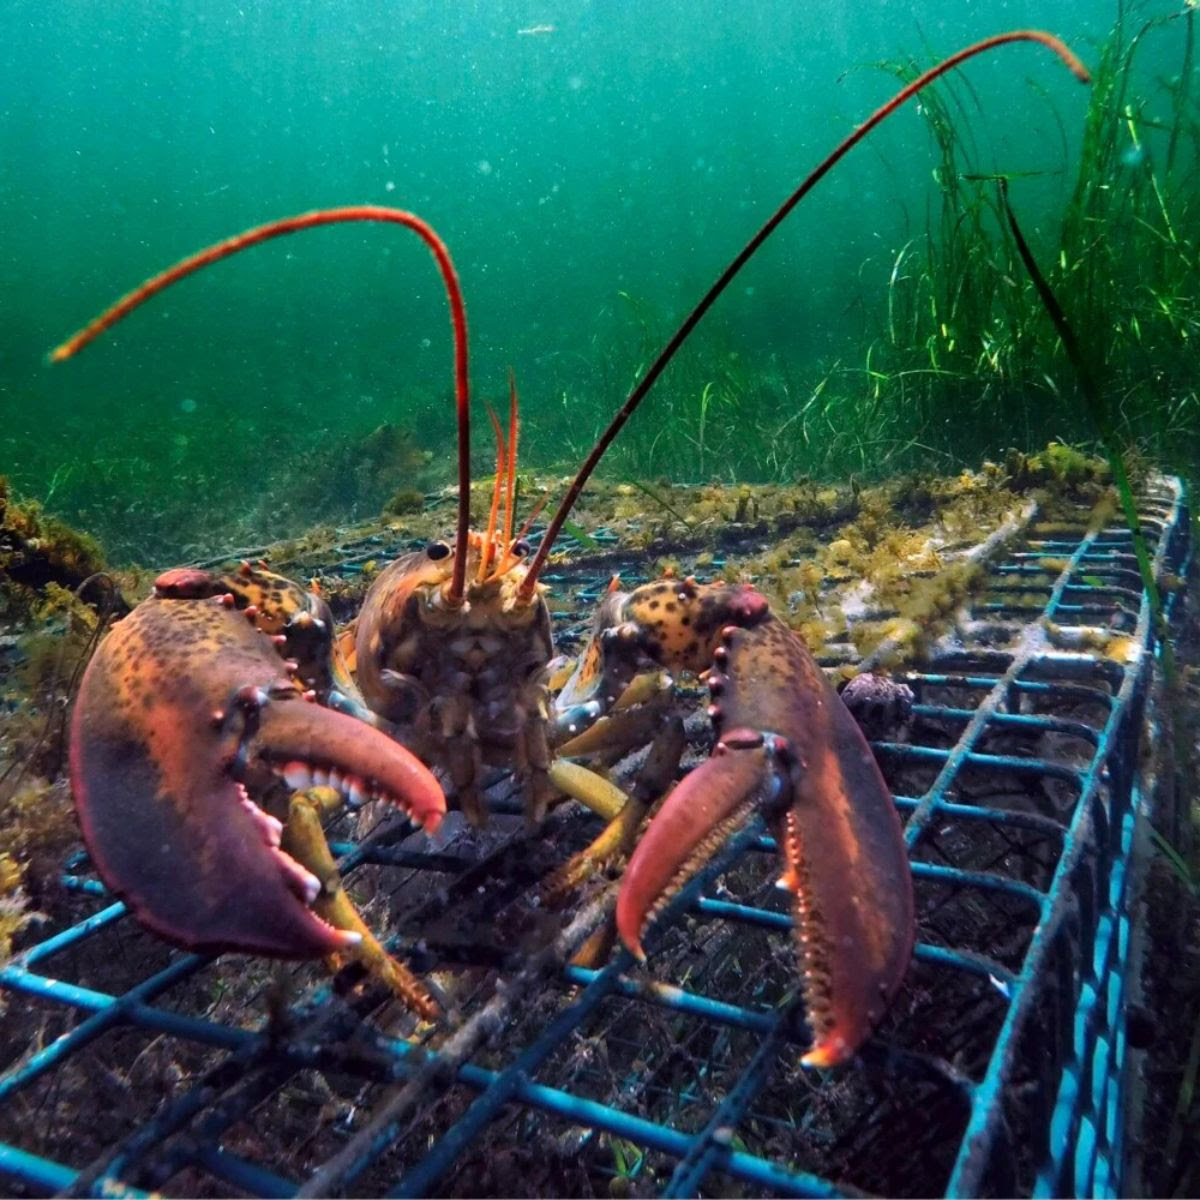 Lobster sitting on top of a trap at the bottom of the ocean